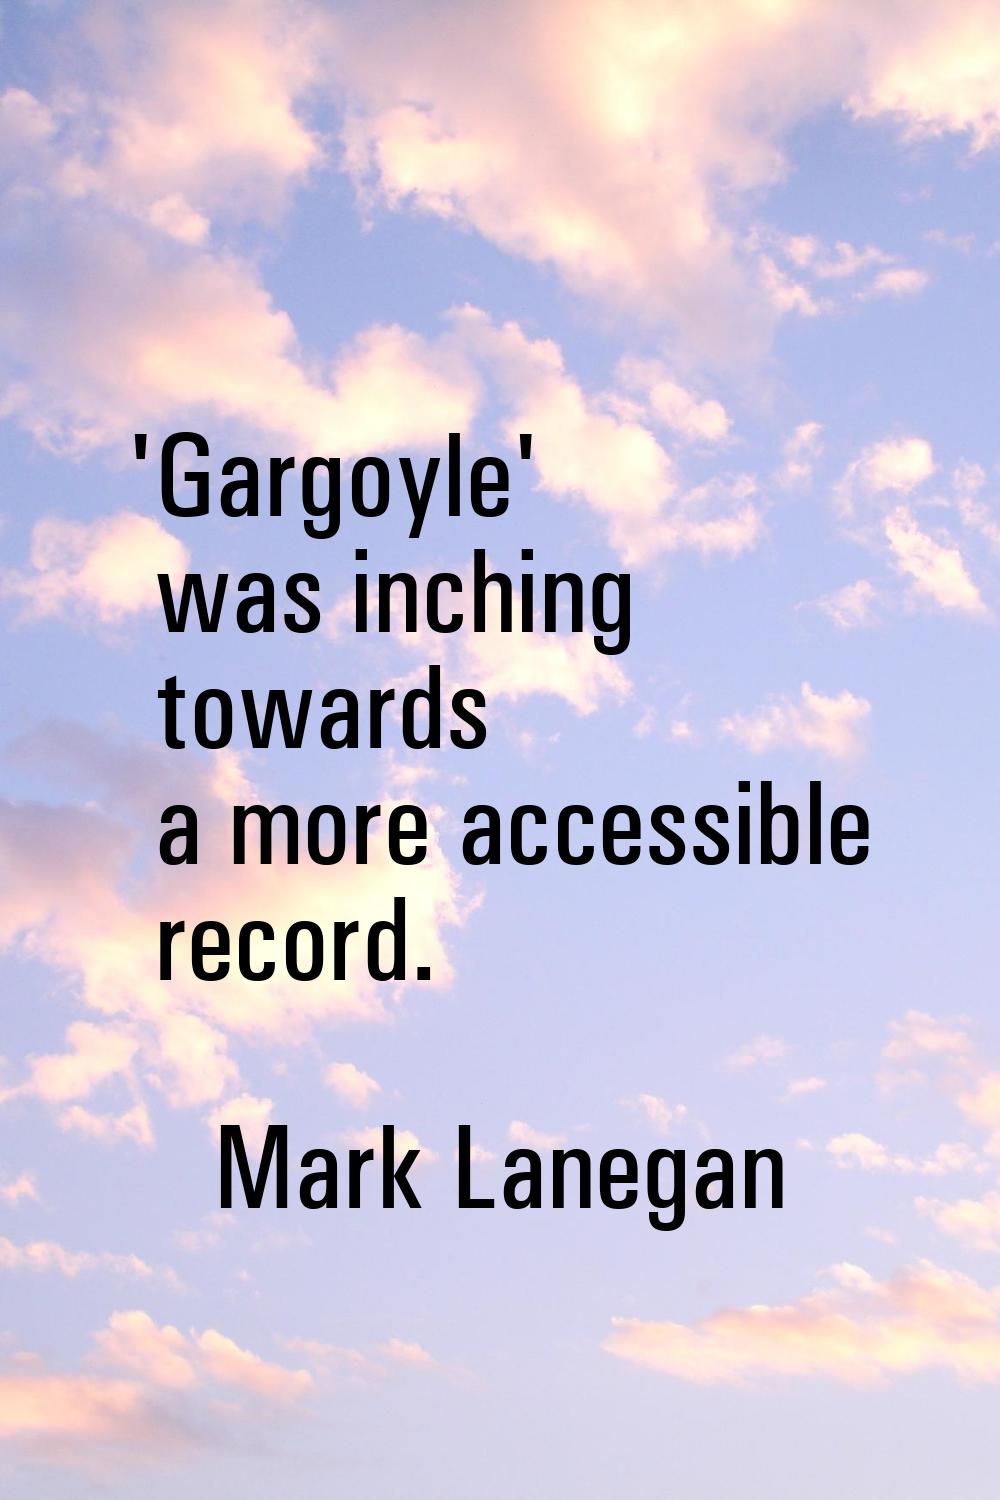 'Gargoyle' was inching towards a more accessible record.